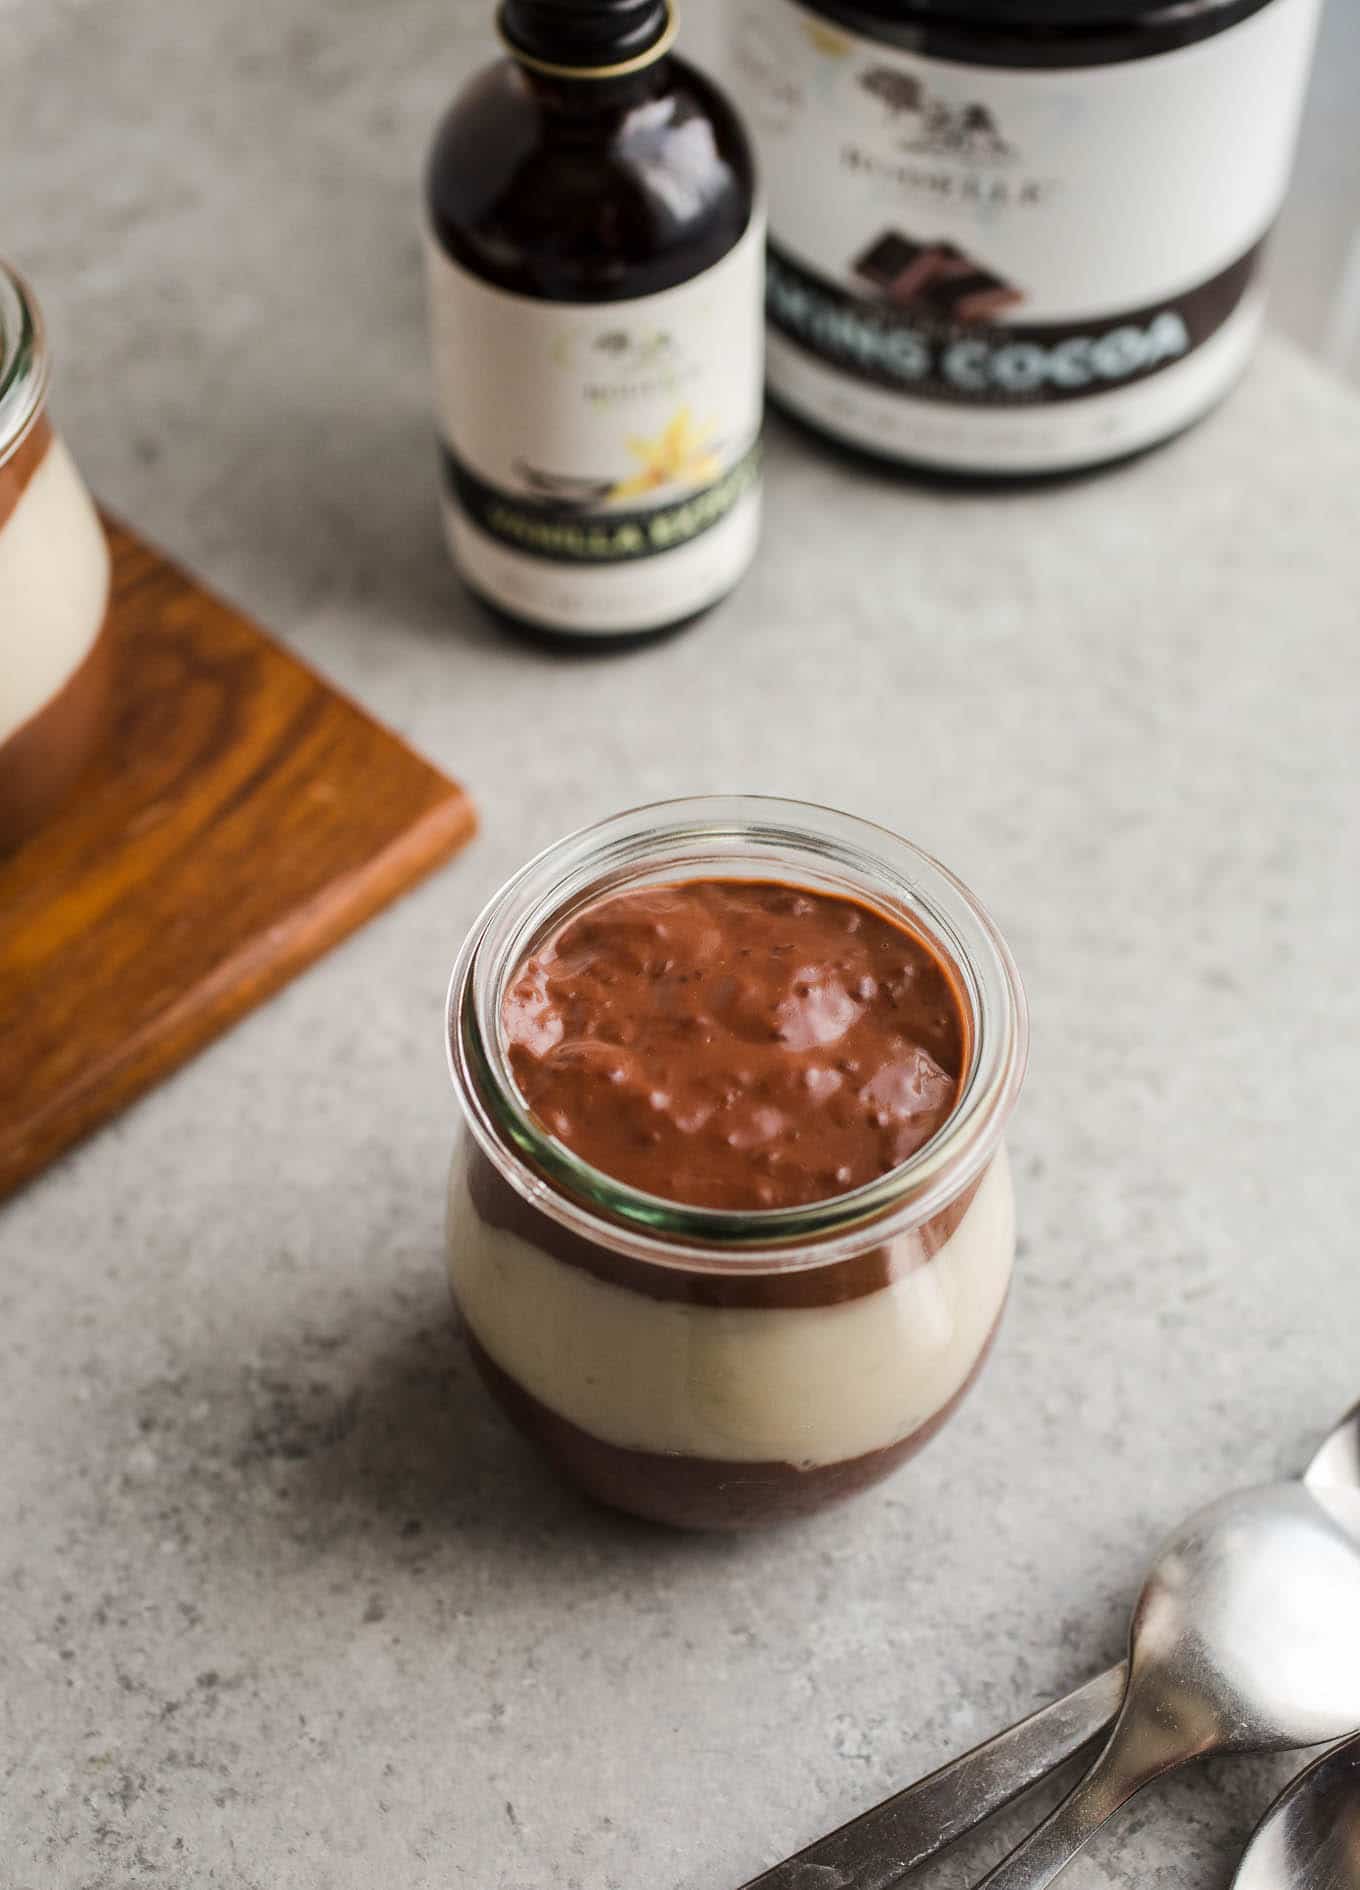 Vegan Chocolate Vanilla Pudding Cups made with rich chocolate cocoa powder, coconut milk, almond milk, maple syrup, and pure vanilla extract. An easy gluten-free, dairy-free pudding recipe!